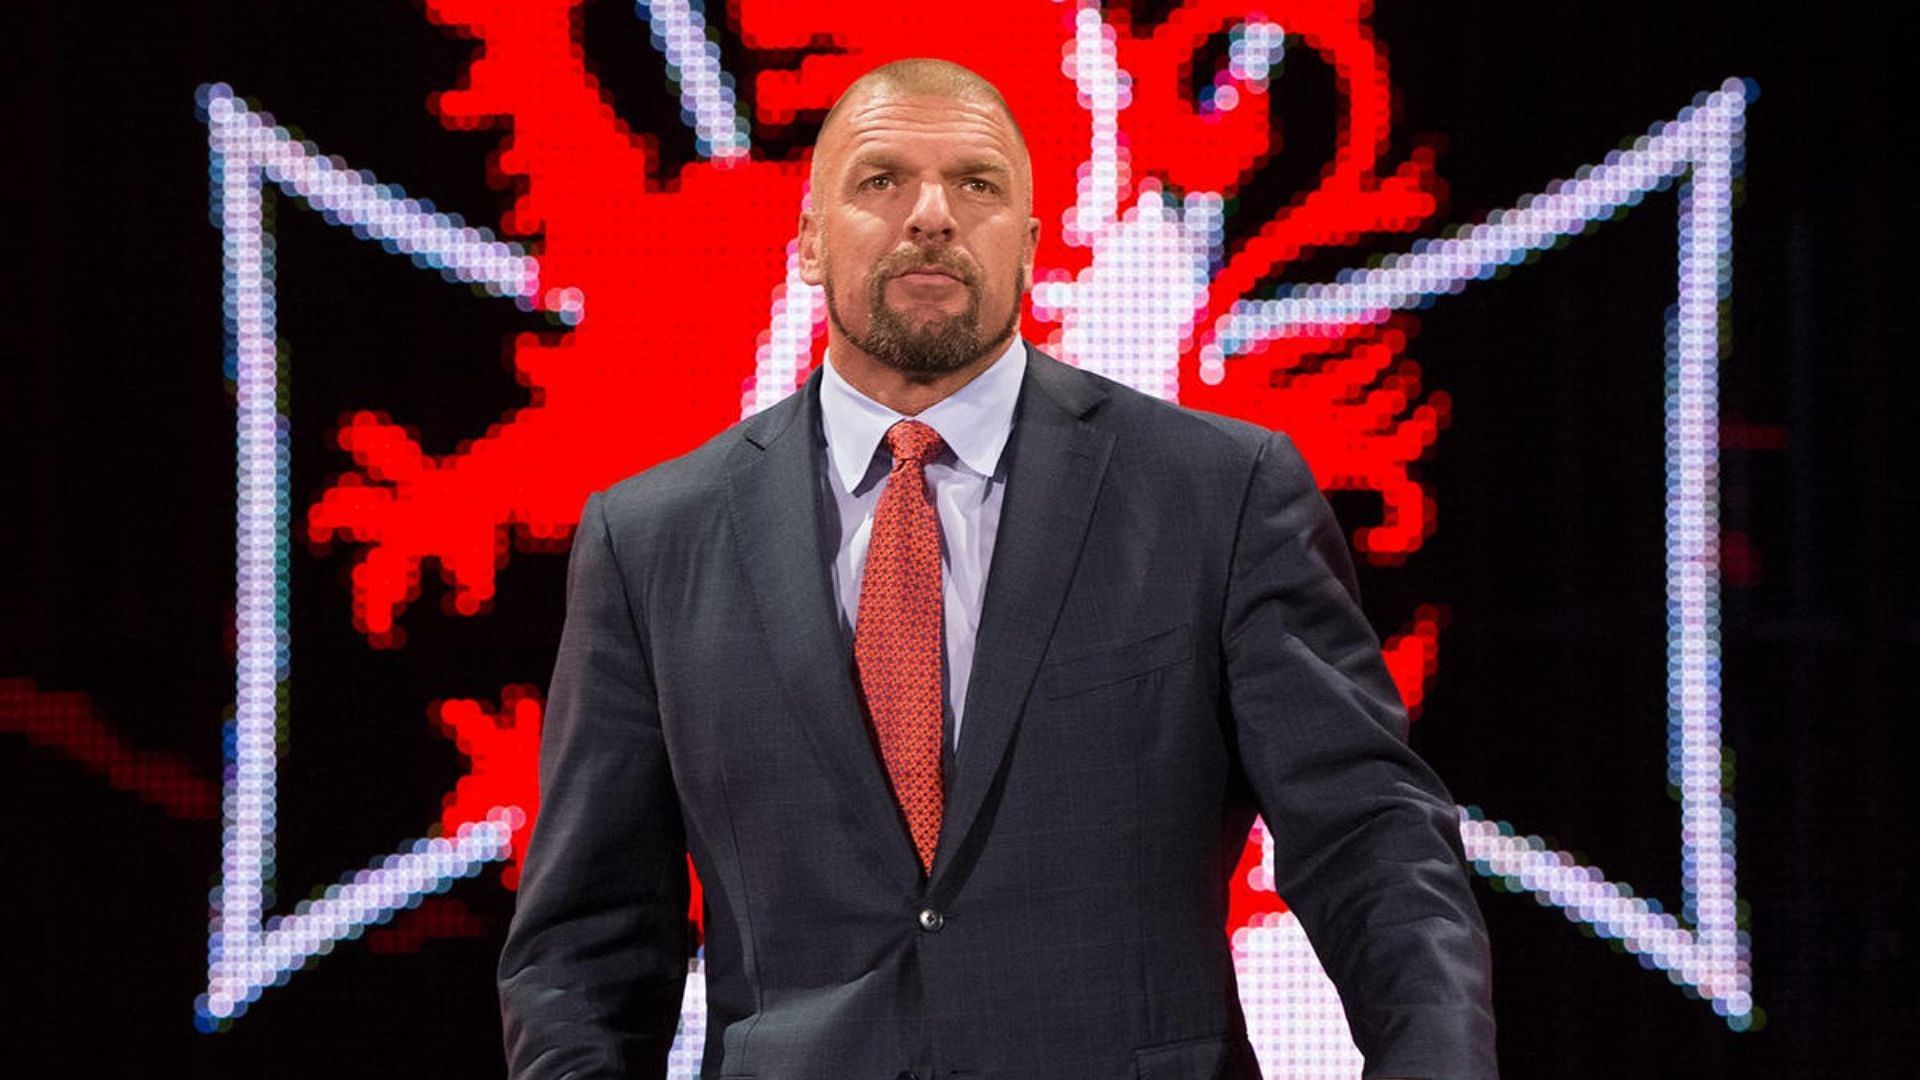 Triple H has effected a lot of changes in WWE over the last few years.